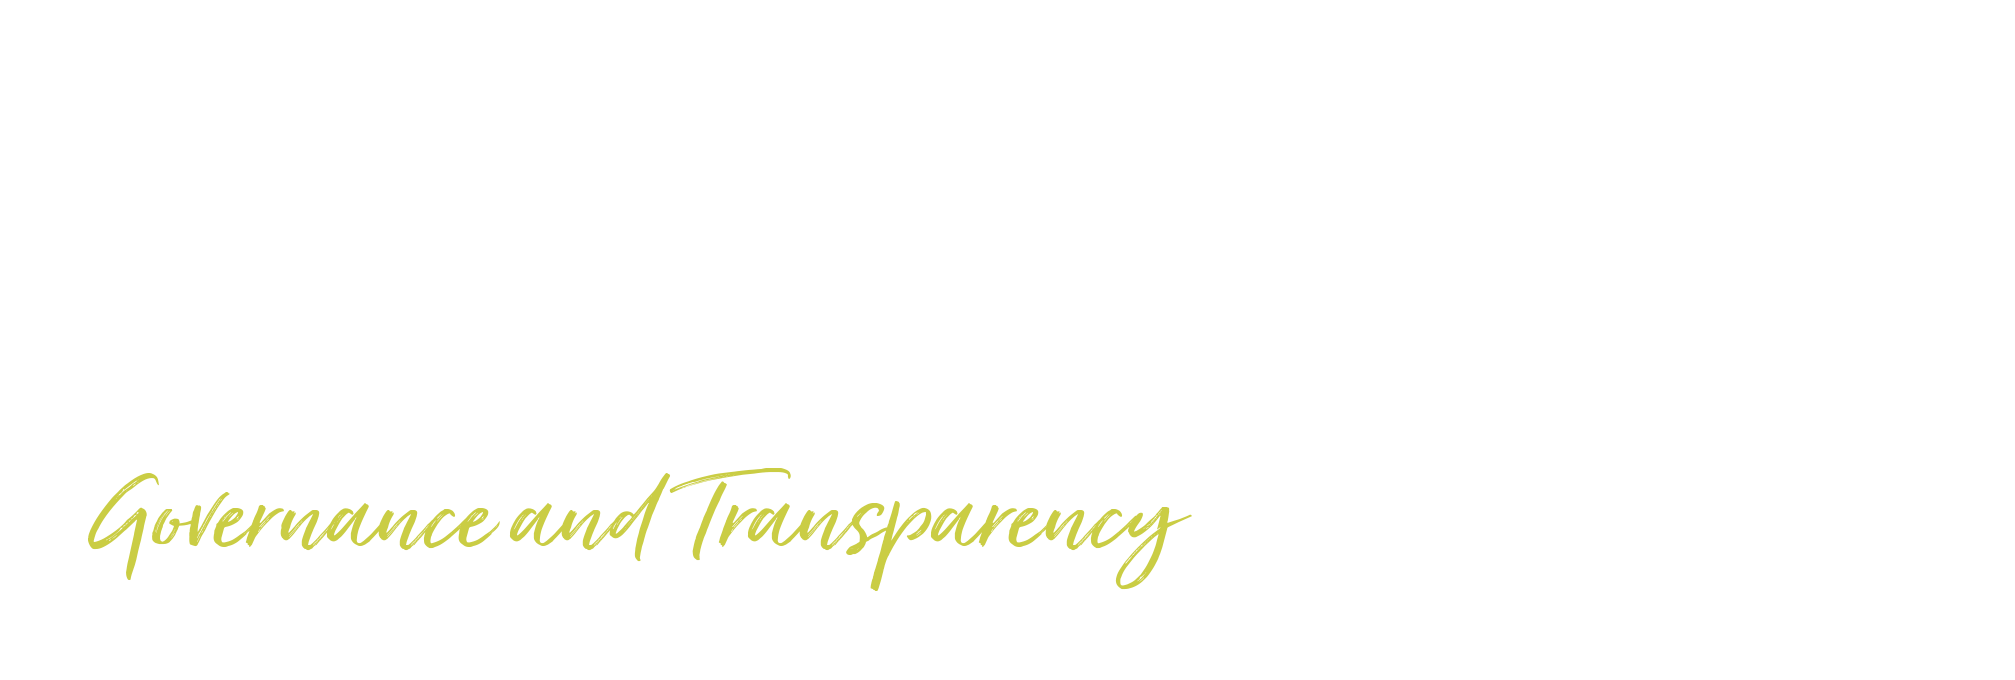 Community Benefit Governance and Transparency